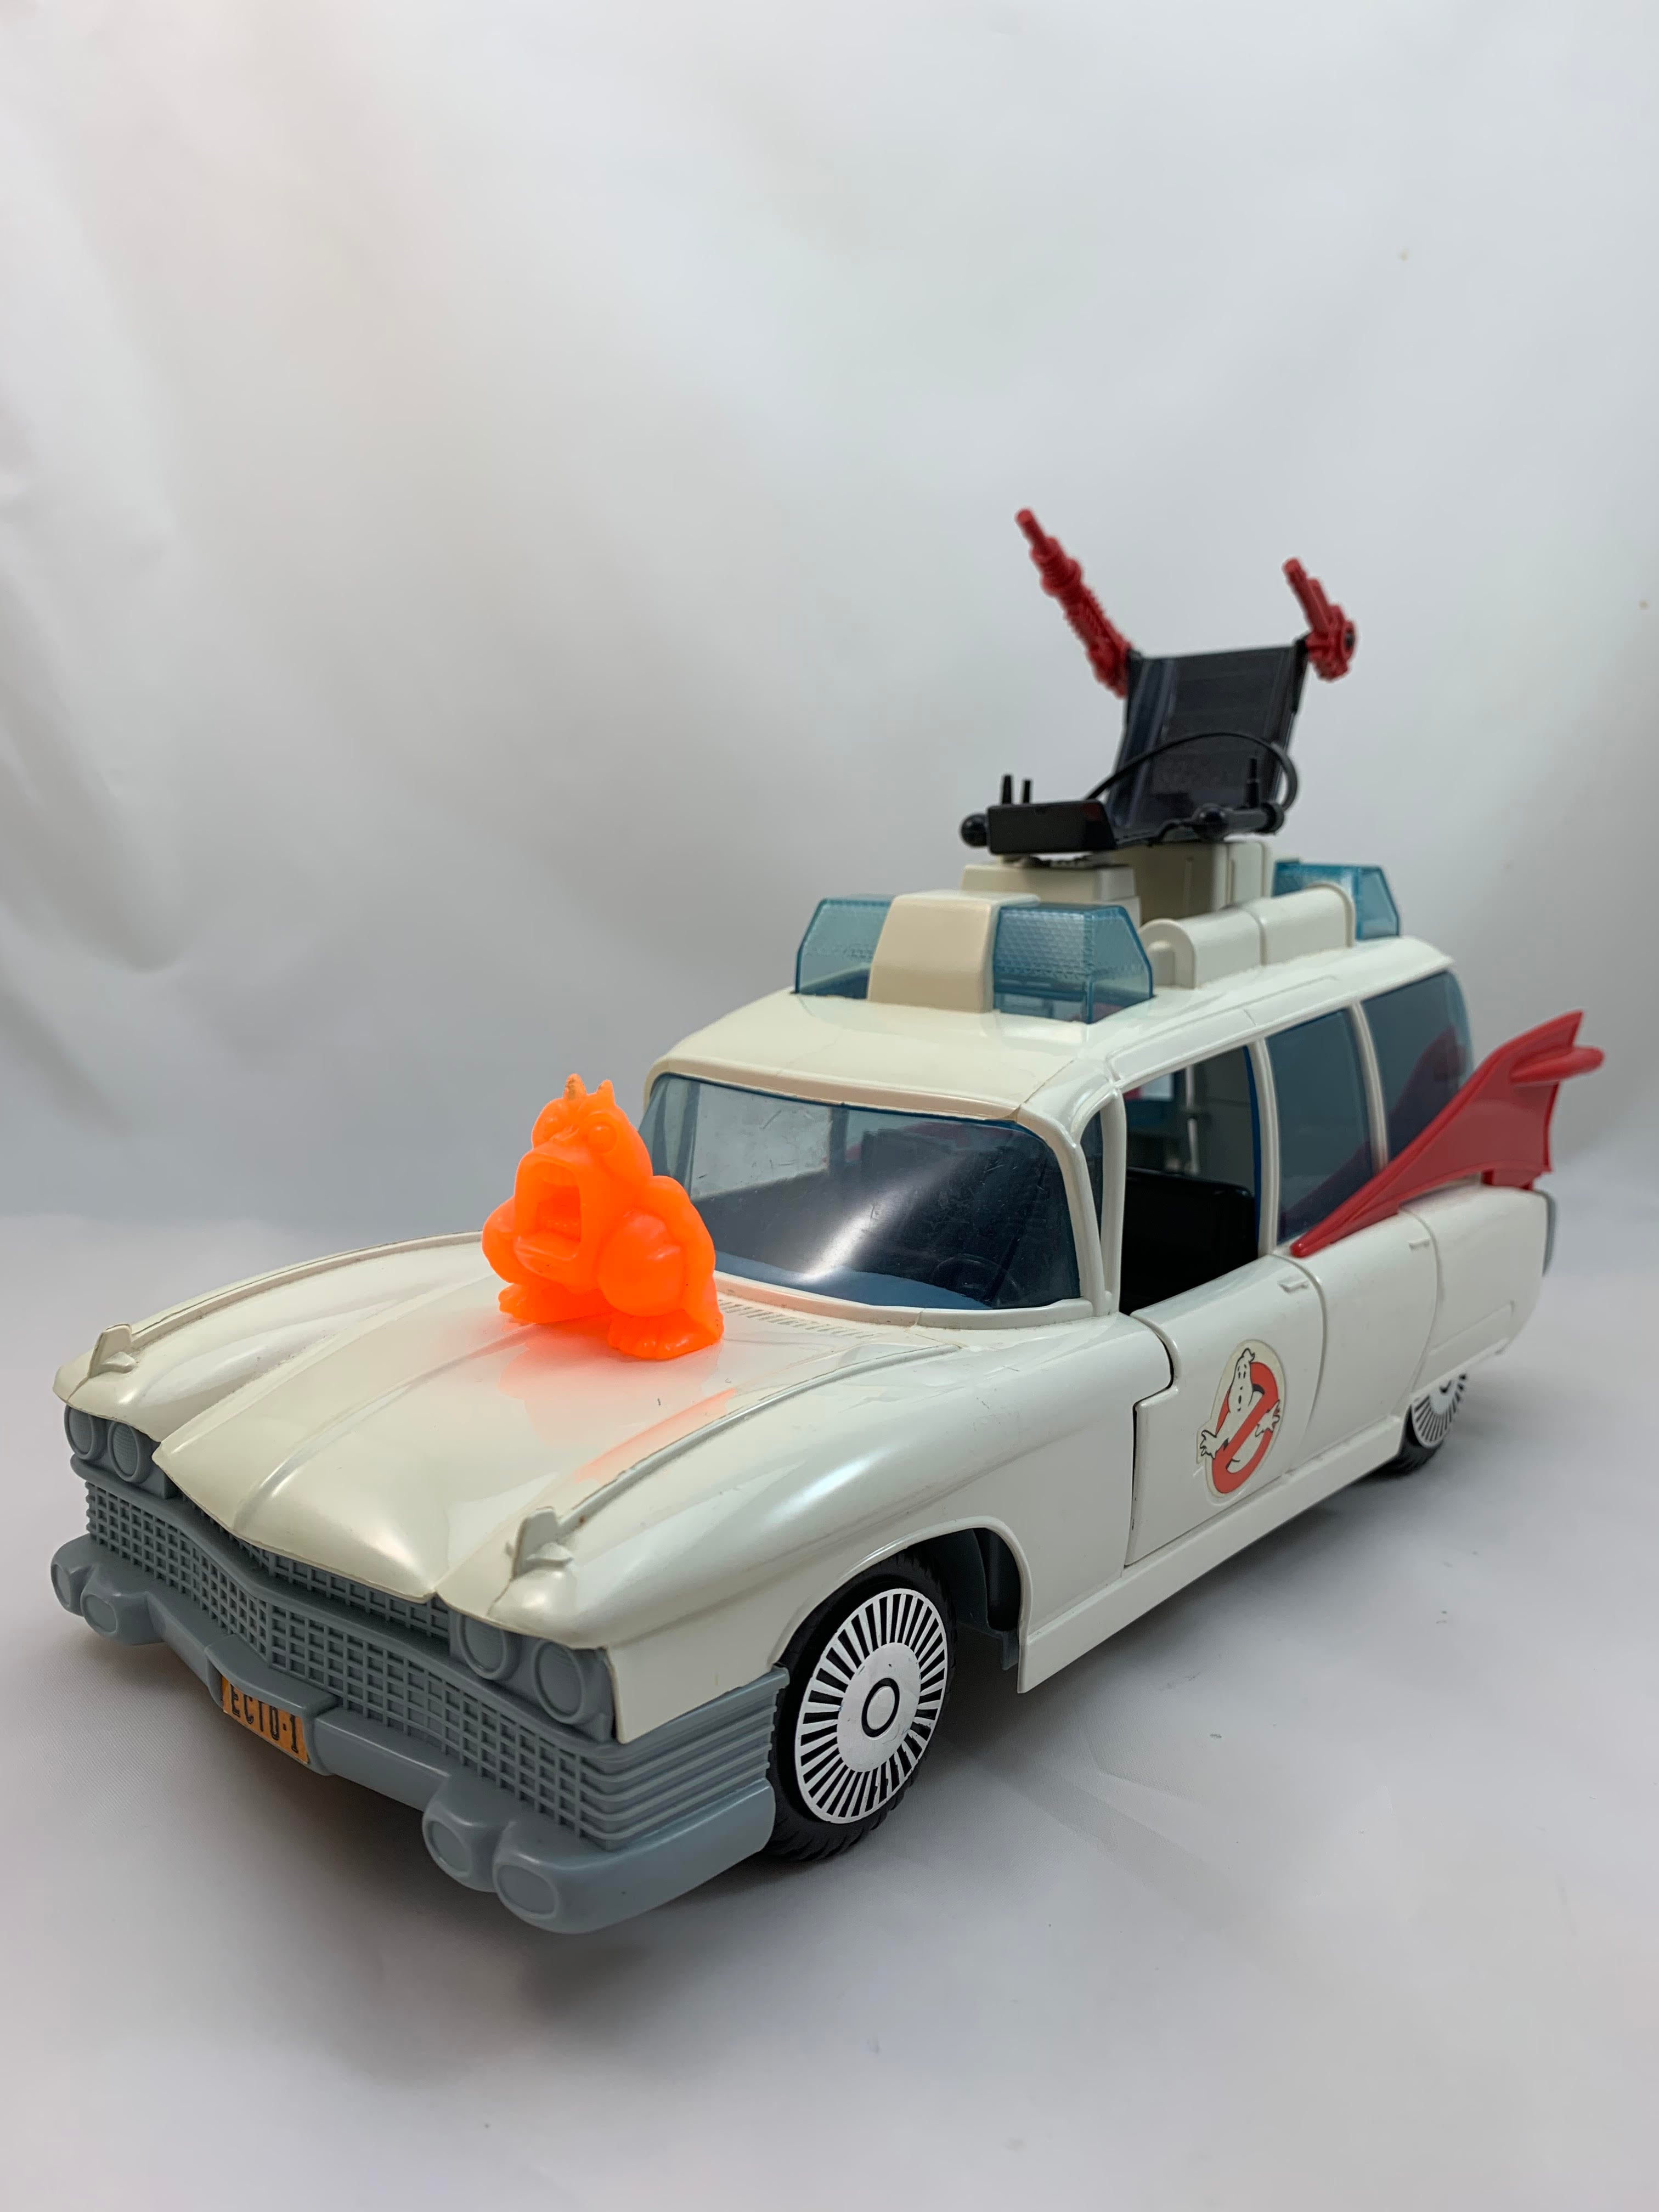 1984 Kenner Ghostbusters Ecto-1 Toy Vehicle Car VTG 海外 即決